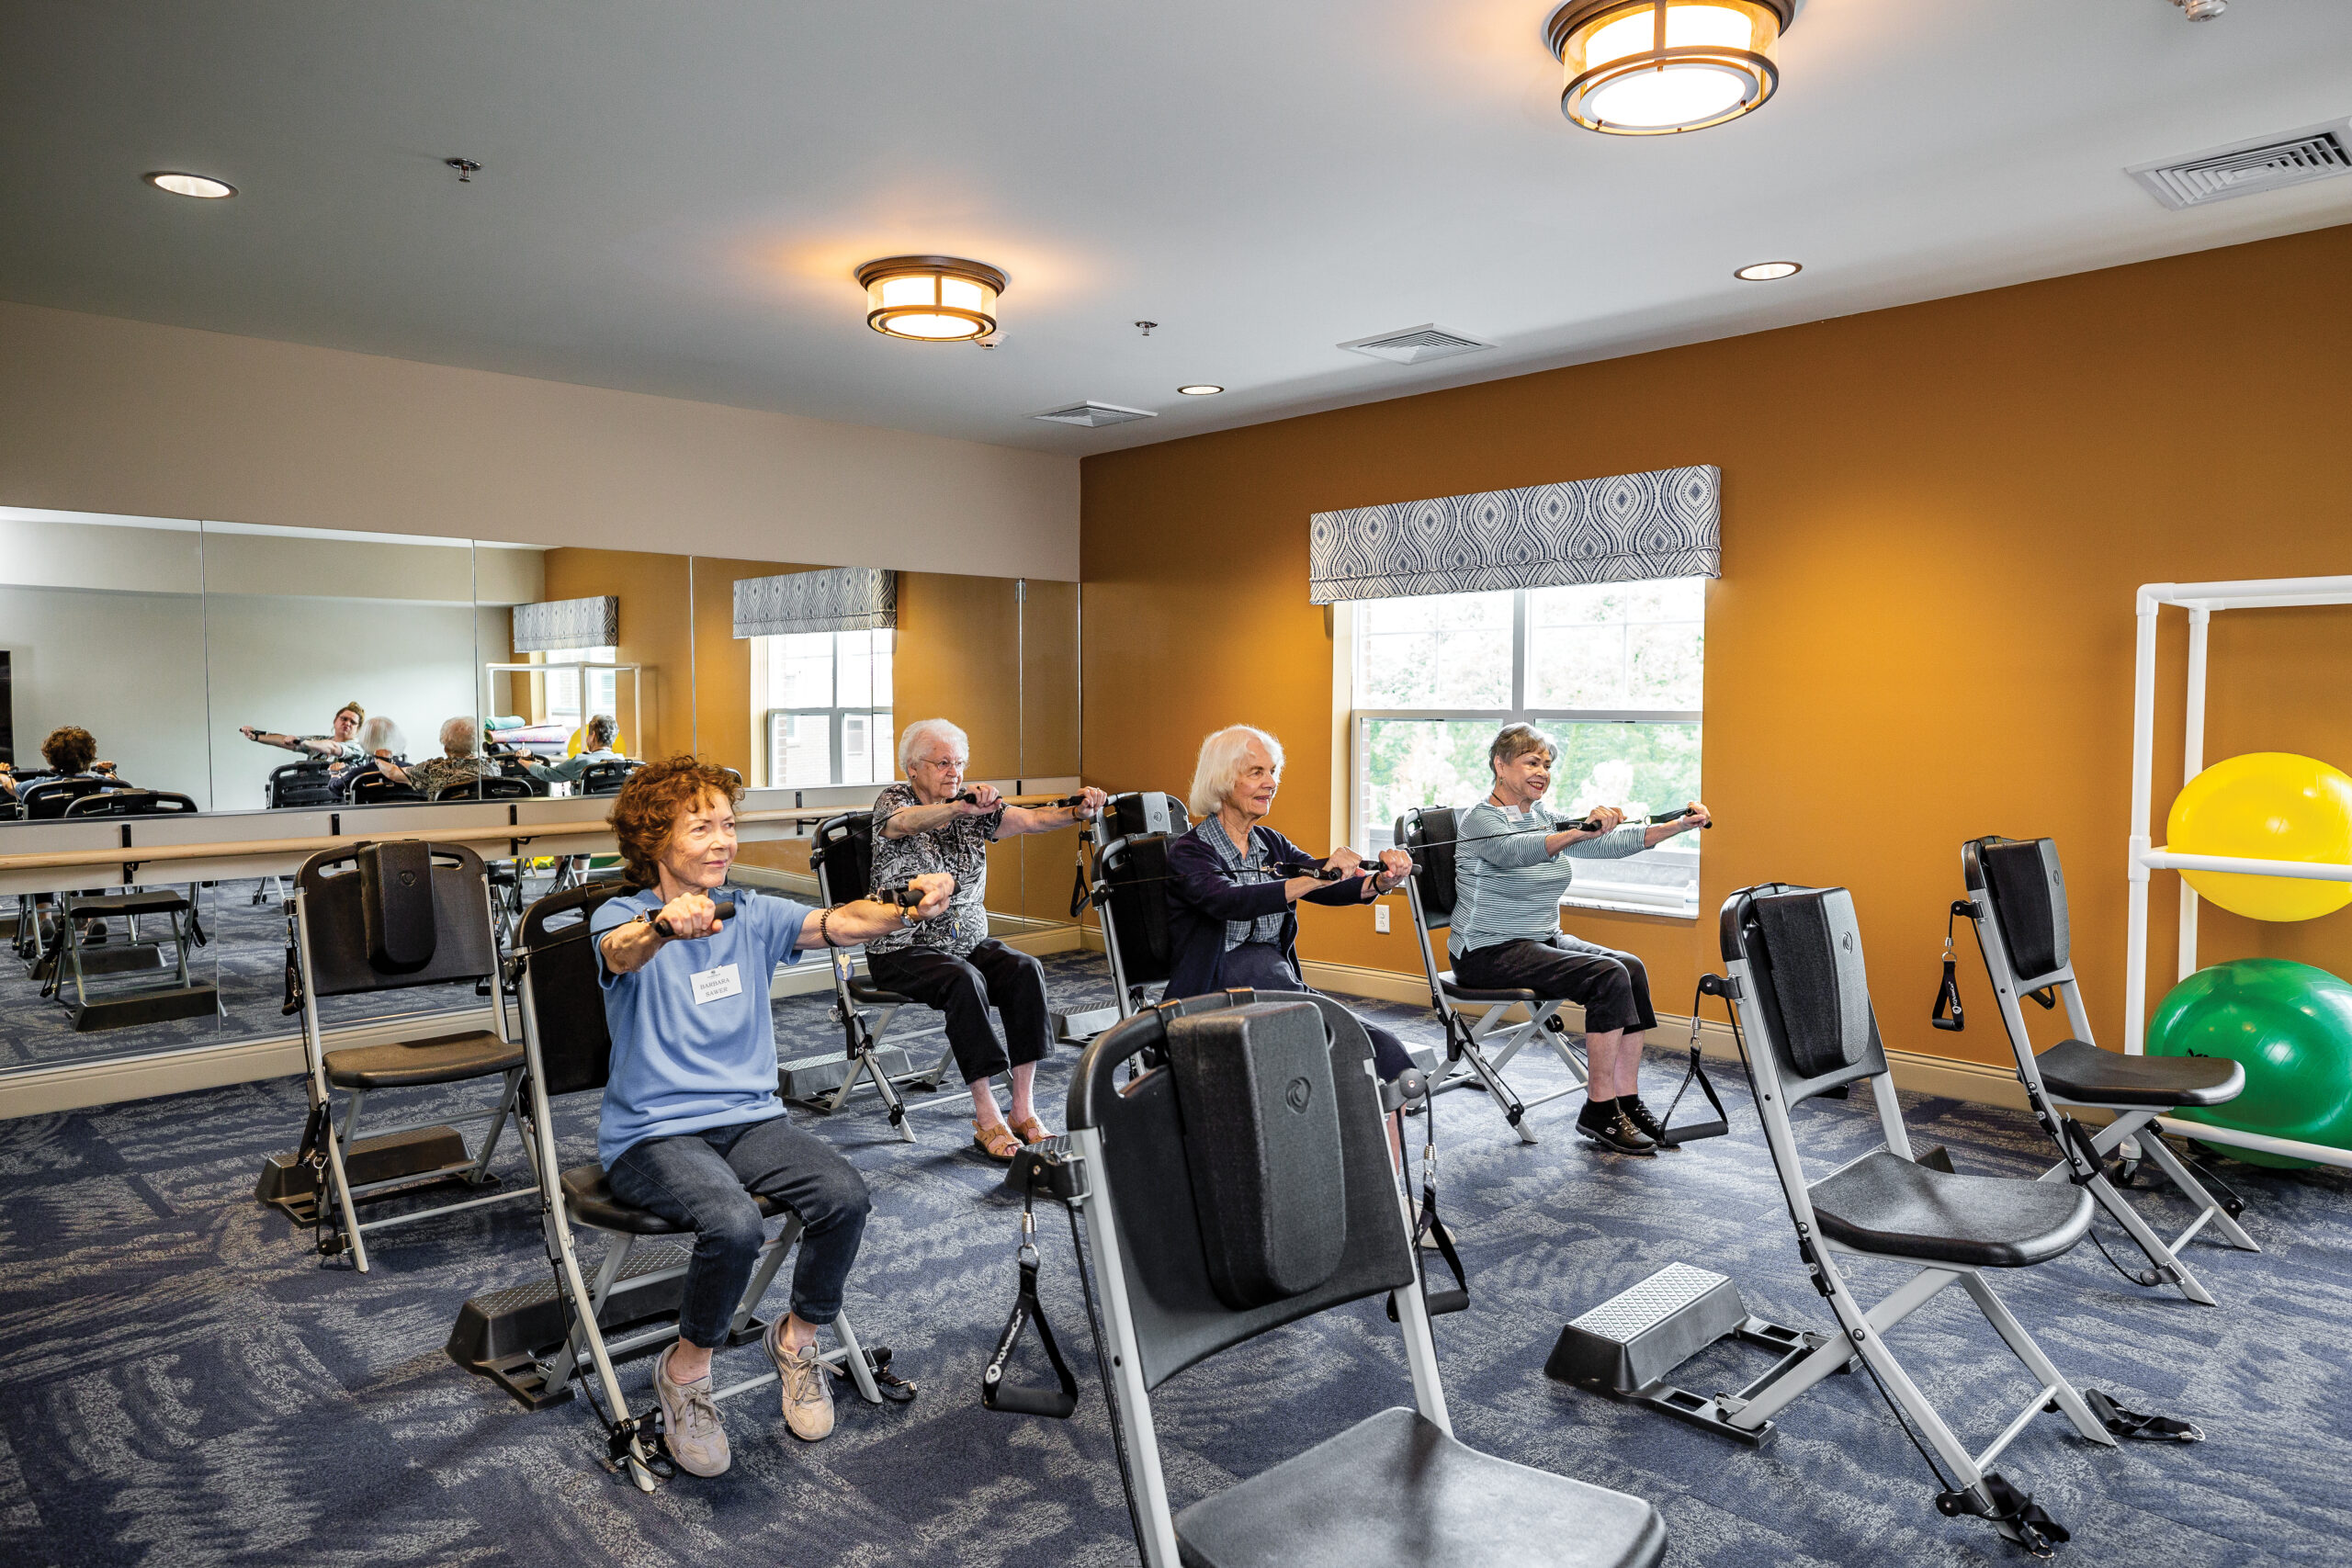 Four women exercising in workout room